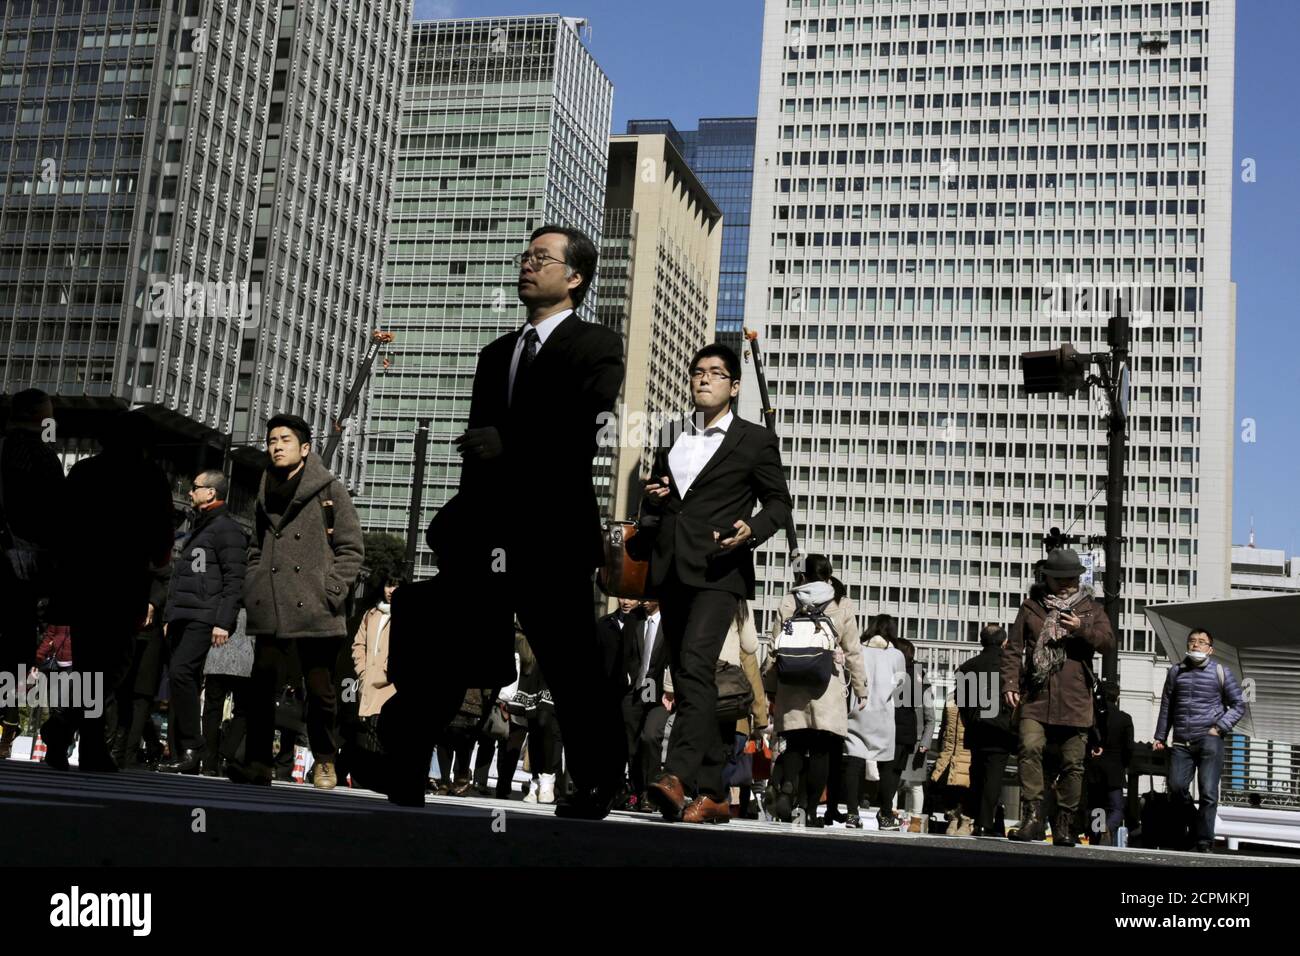 People cross a street in a business district in Tokyo, Japan, February 16, 2016. The Bank of Japan's negative interest rates came into effect on Tuesday in a radical plan already deemed a failure by financial markets, highlighting Tokyo's lack of options to spur growth as global markets sputter.  REUTERS/Thomas Peter Stock Photo